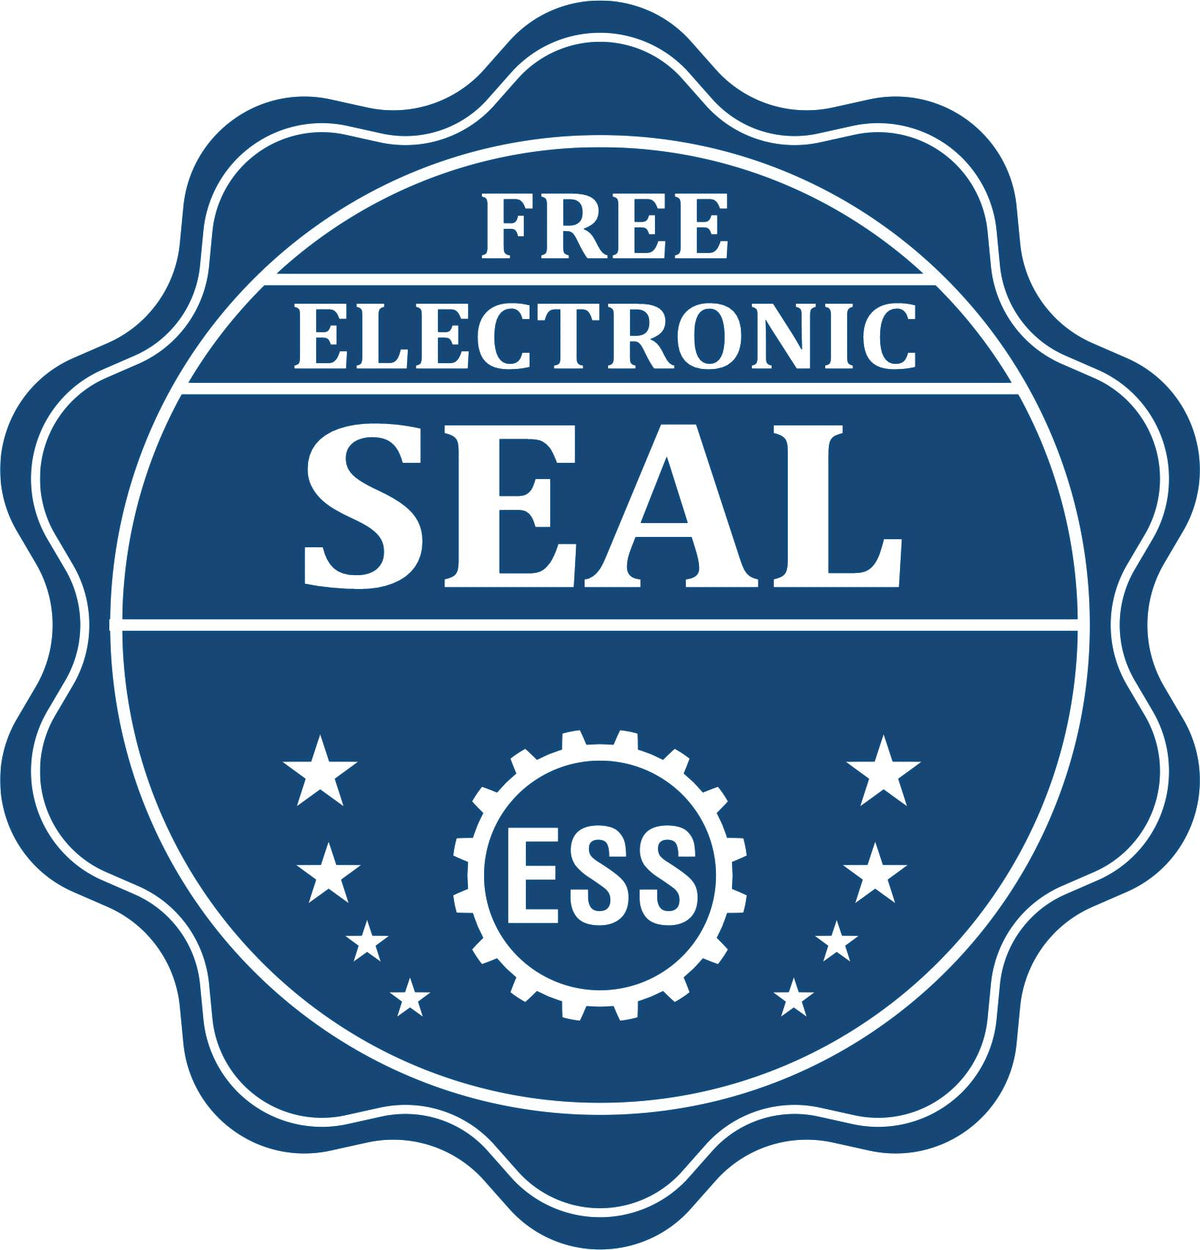 A badge showing a free electronic seal for the State of Tennessee Extended Long Reach Geologist Seal with stars and the ESS gear on the emblem.